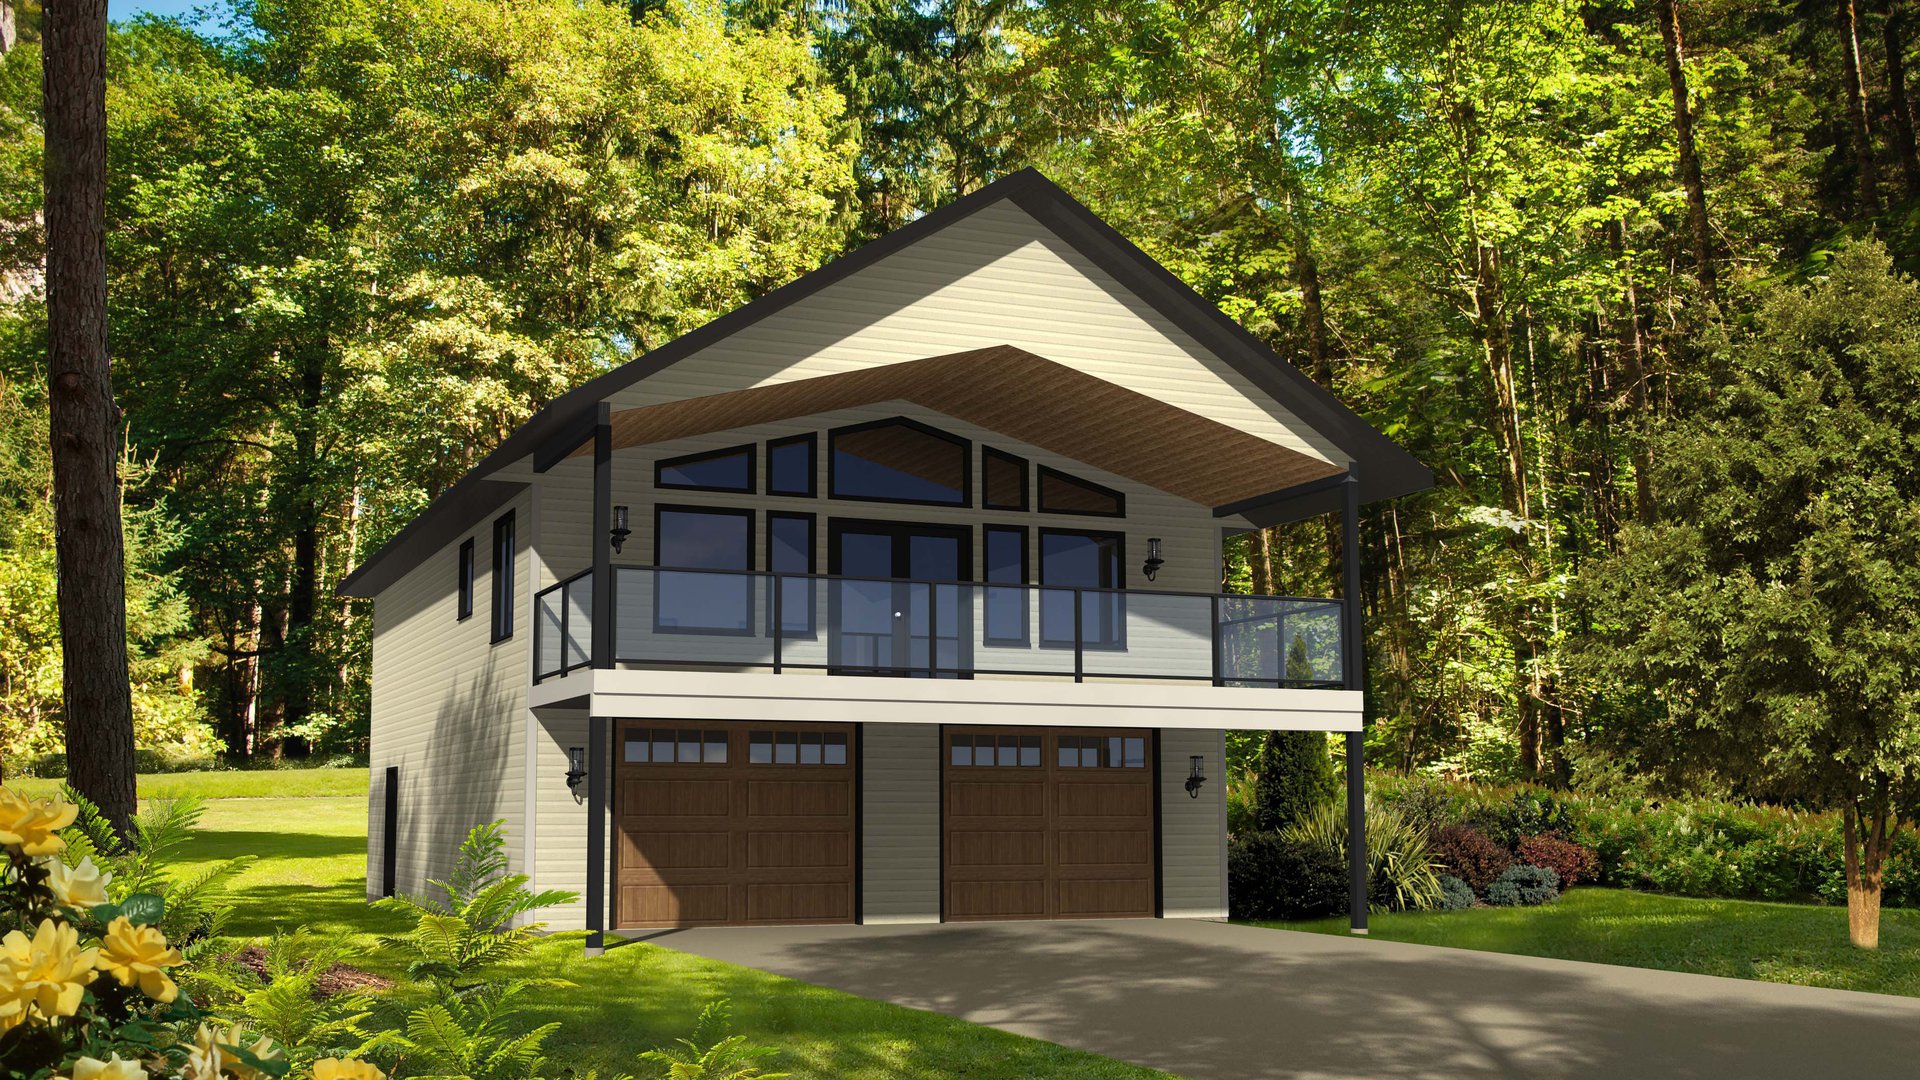 Southport house plan modular homes nelson homes ready to move homes prefabricated home packages.jpg